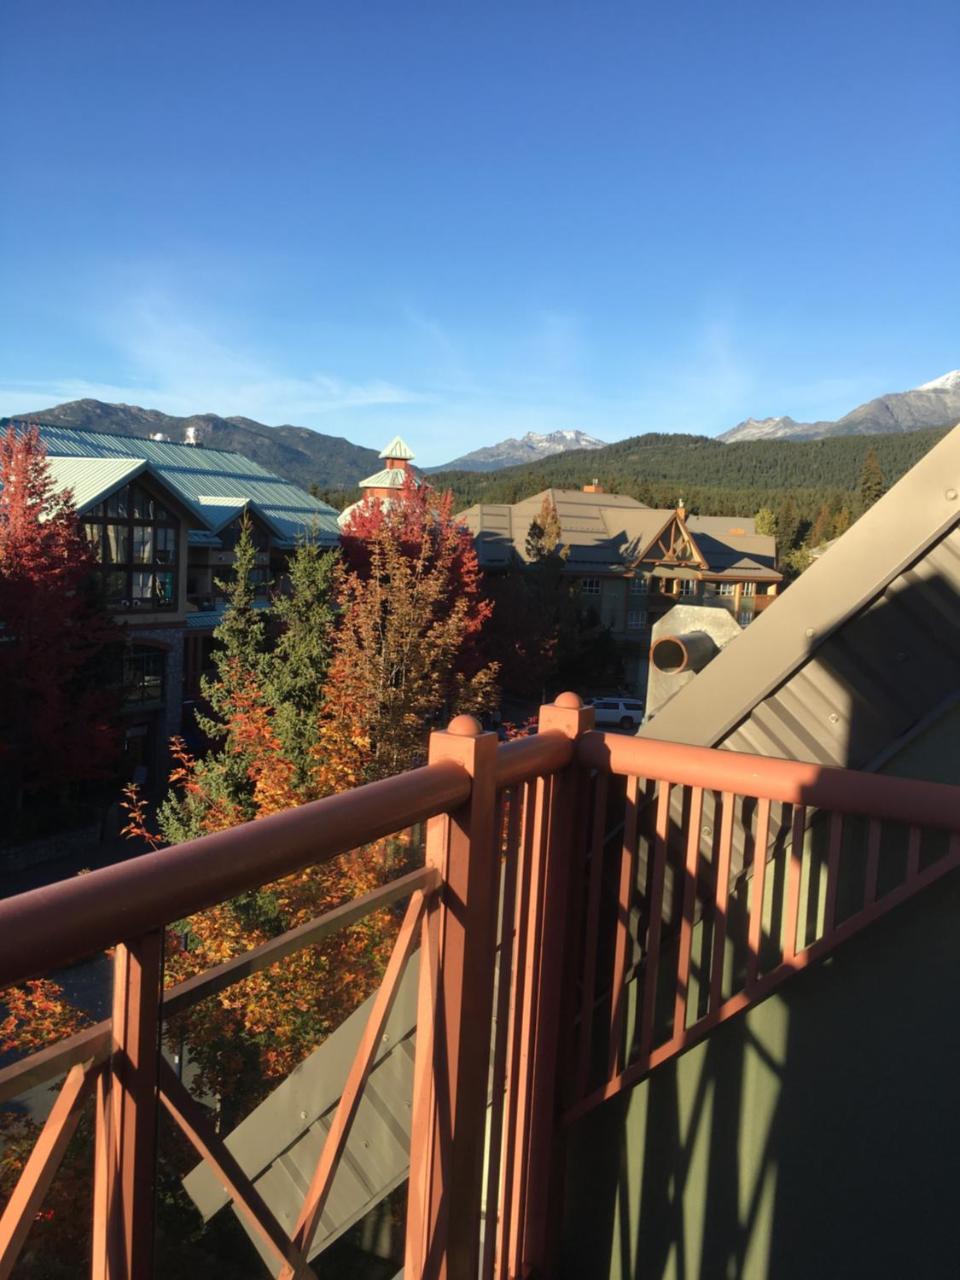 Beautiful Whistler Village Alpenglow Suite Queen Size Bed Air Conditioning Cable And Smarttv Wifi Fireplace Pool Hot Tub Sauna Gym Balcony Mountain Views Экстерьер фото